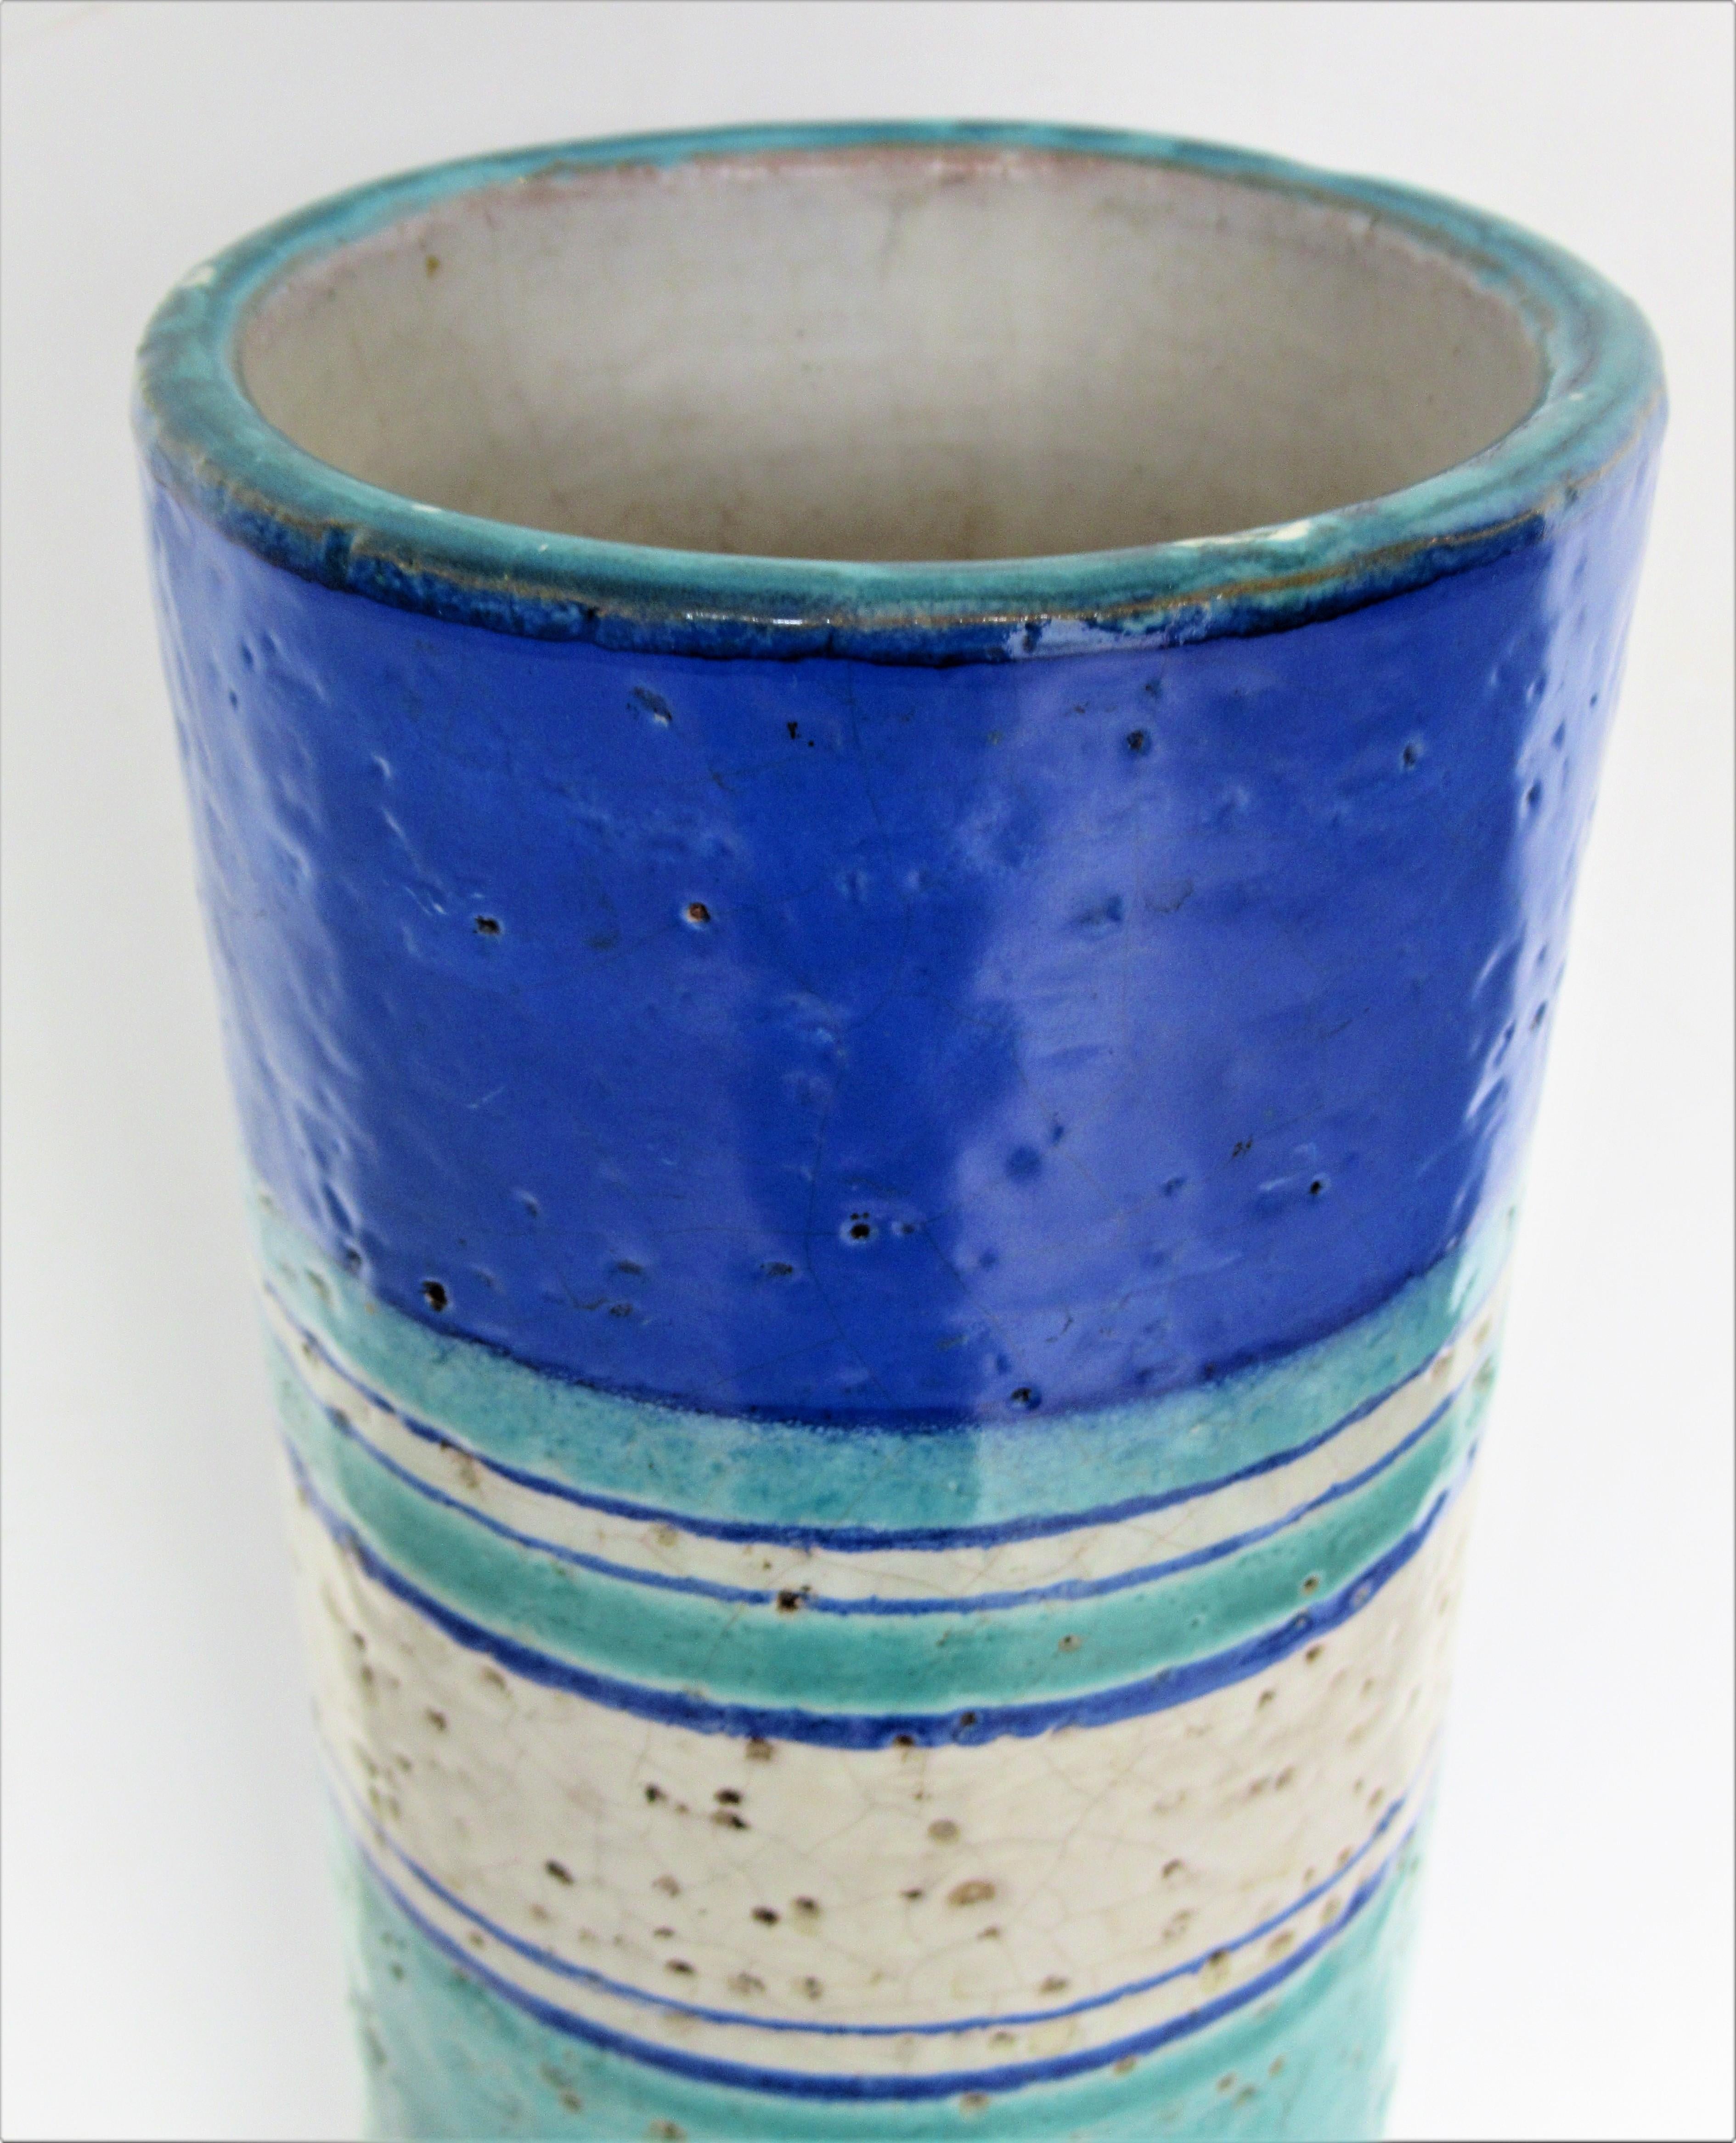 A tall cylinder shaped ceramic vase by Bitossi with beautifully textured surface and brilliant glazes of turquoise, cobalt blue, ivory in an alternating concentric ring design. Circa 1960.  Signed on underside Italy 4733. Measures 17 inches tall.